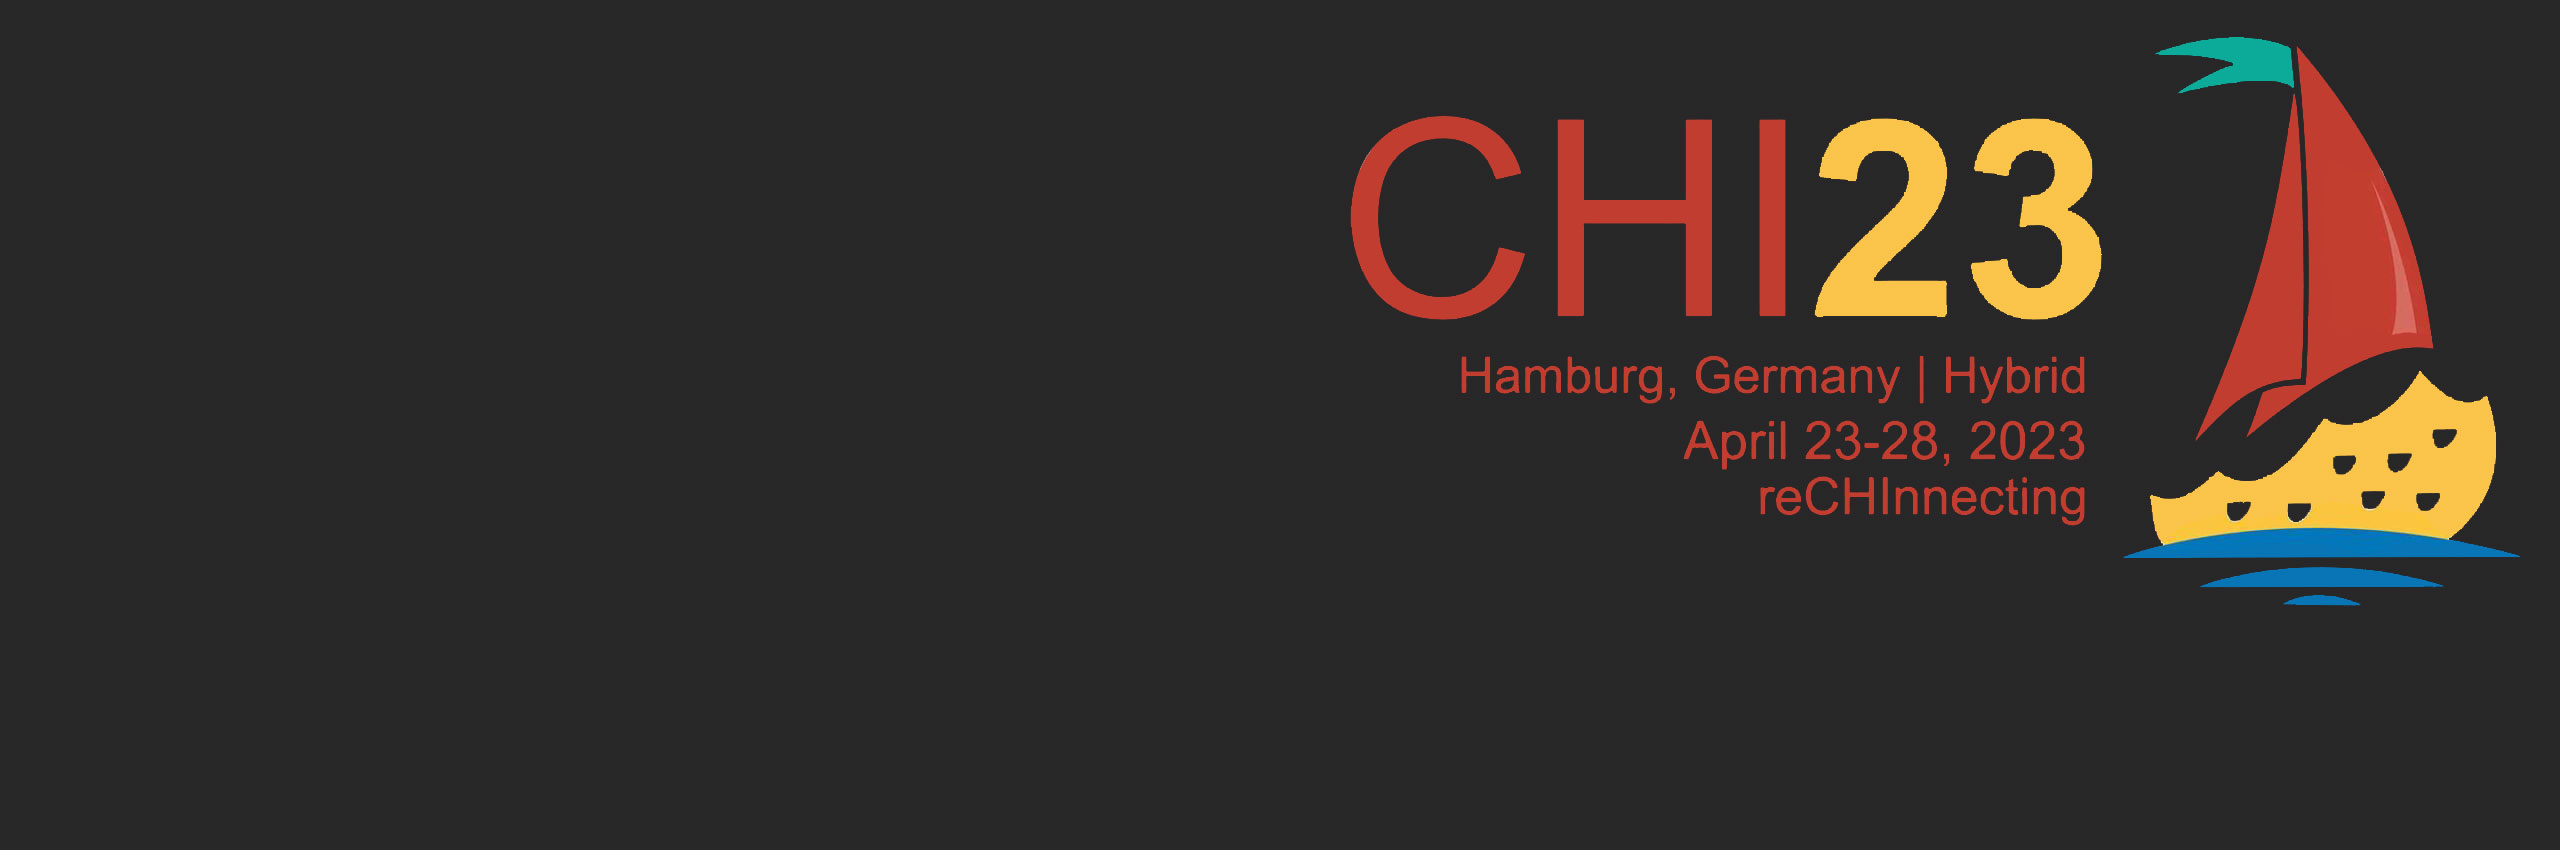 The logo for the CHI23 conference, which shows a sailboat floating in water